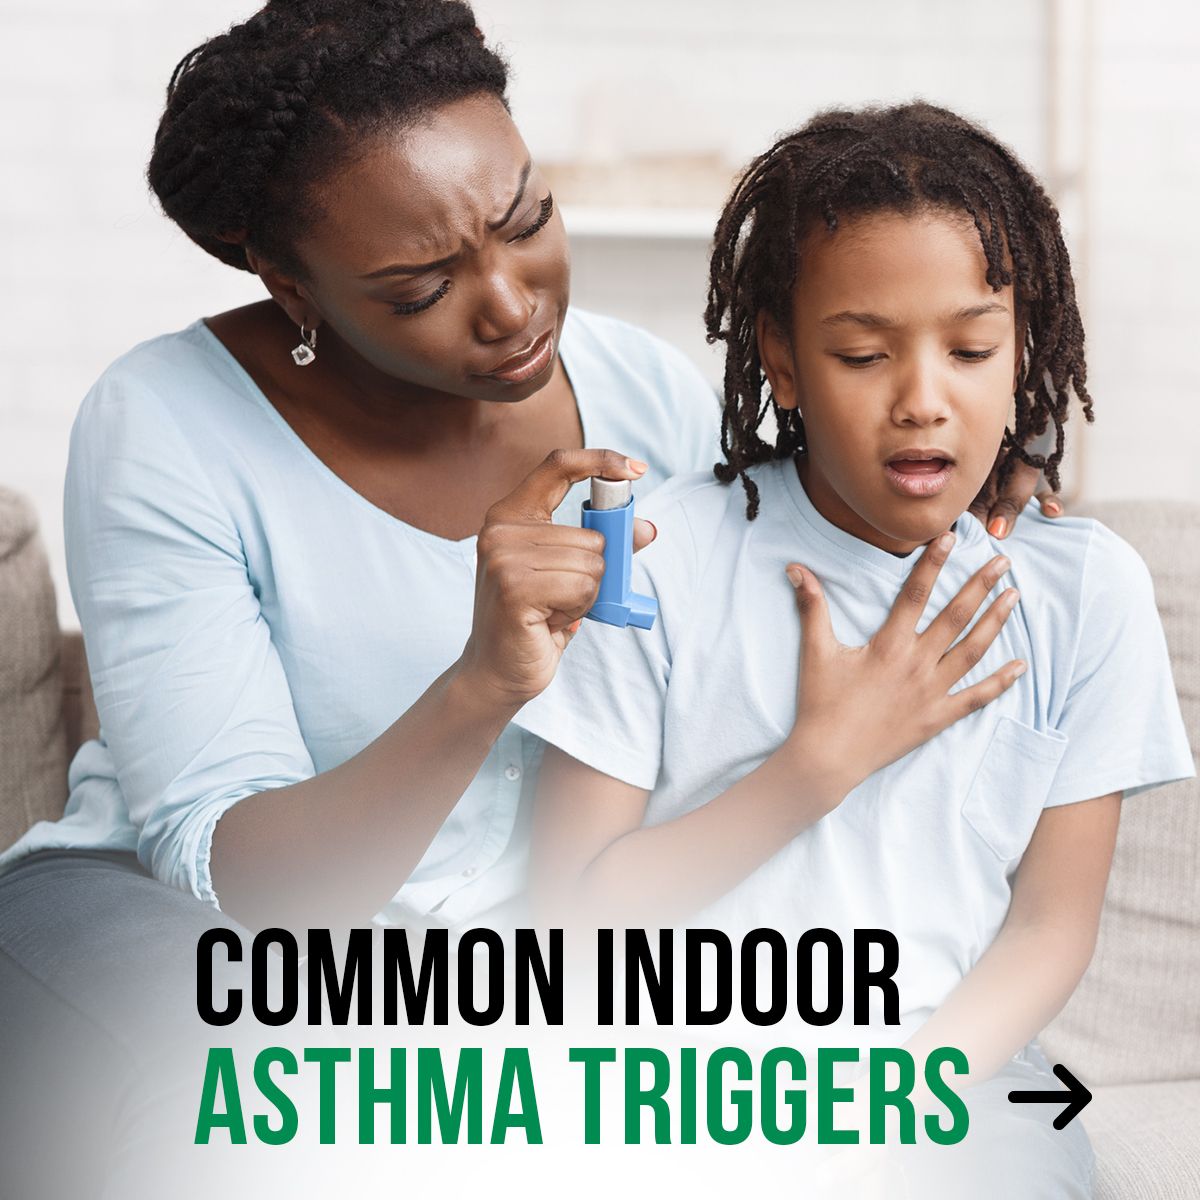 Common Indoor Asthma Triggers➡